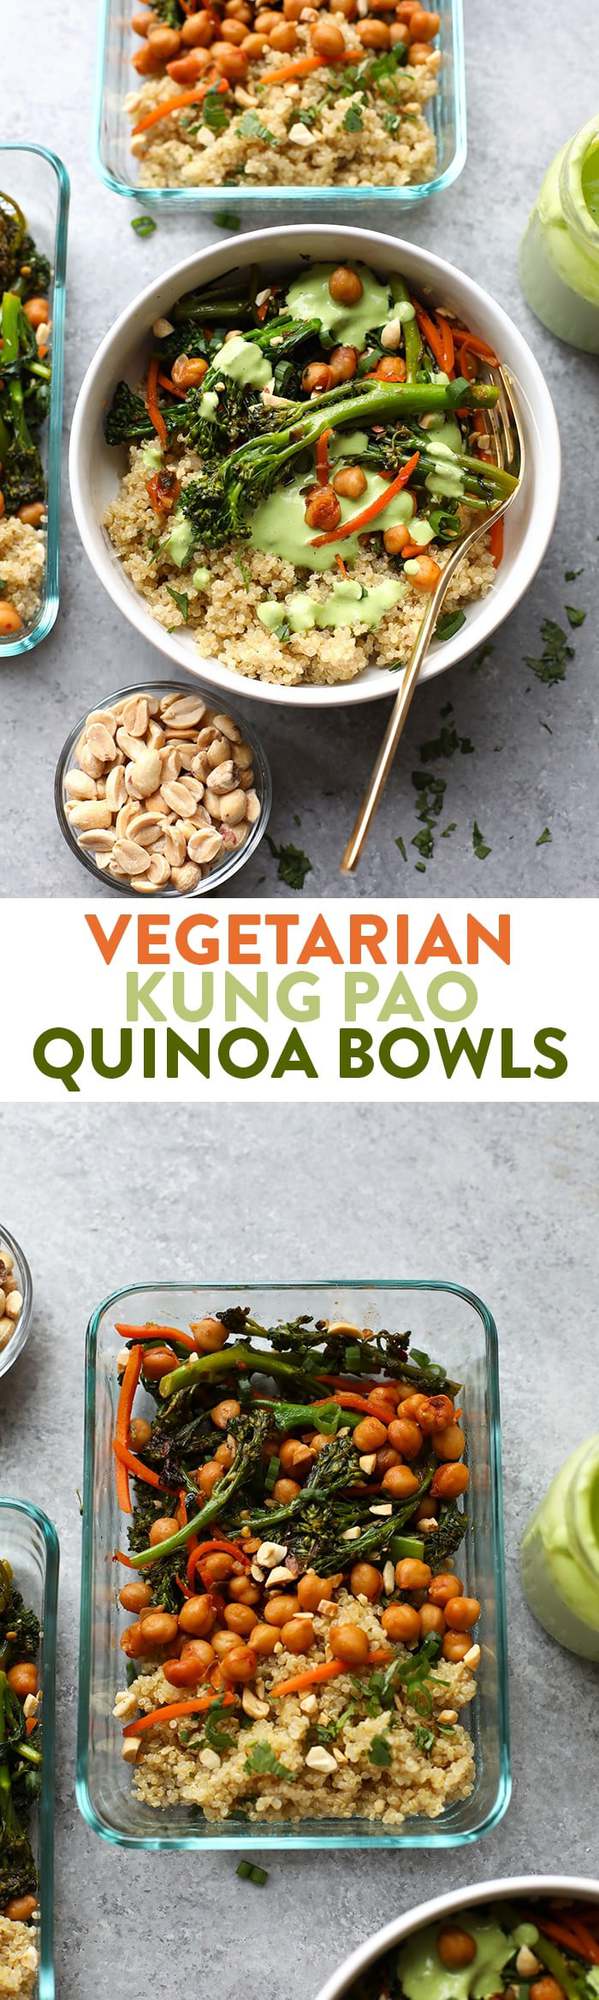 These Vegetarian Kung Pao Quinoa Bowls are the perfect meal prep recipe to make so you can enjoy a healthy lunch or dinner the entire week!